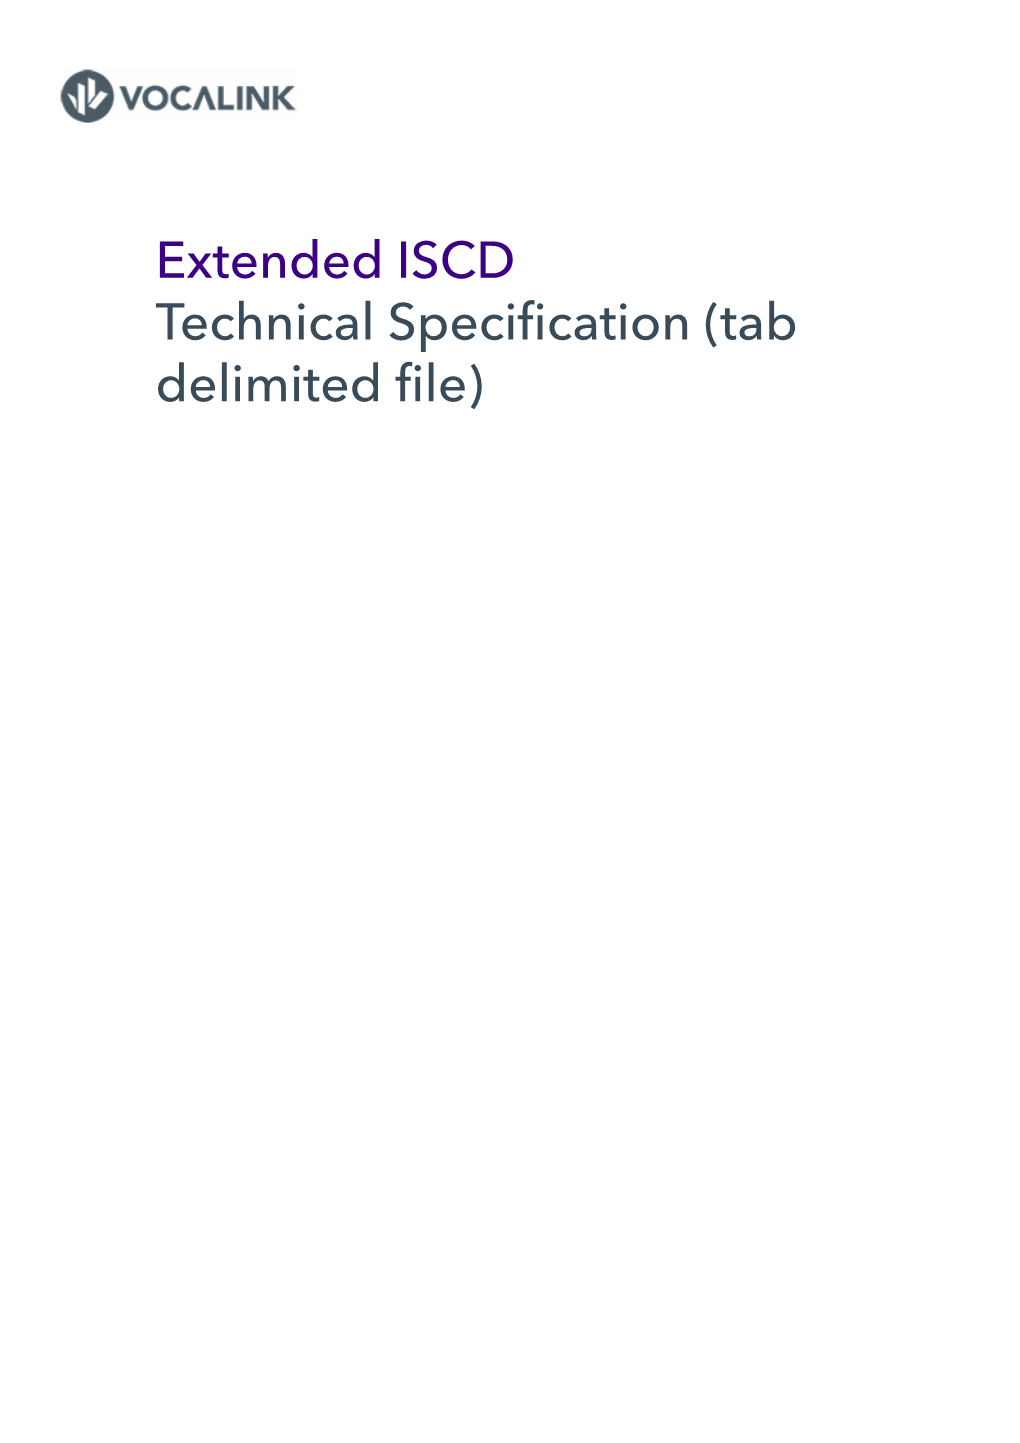 Extended ISCD Technical Specification (Tab Delimited File) VERSION HISTORY